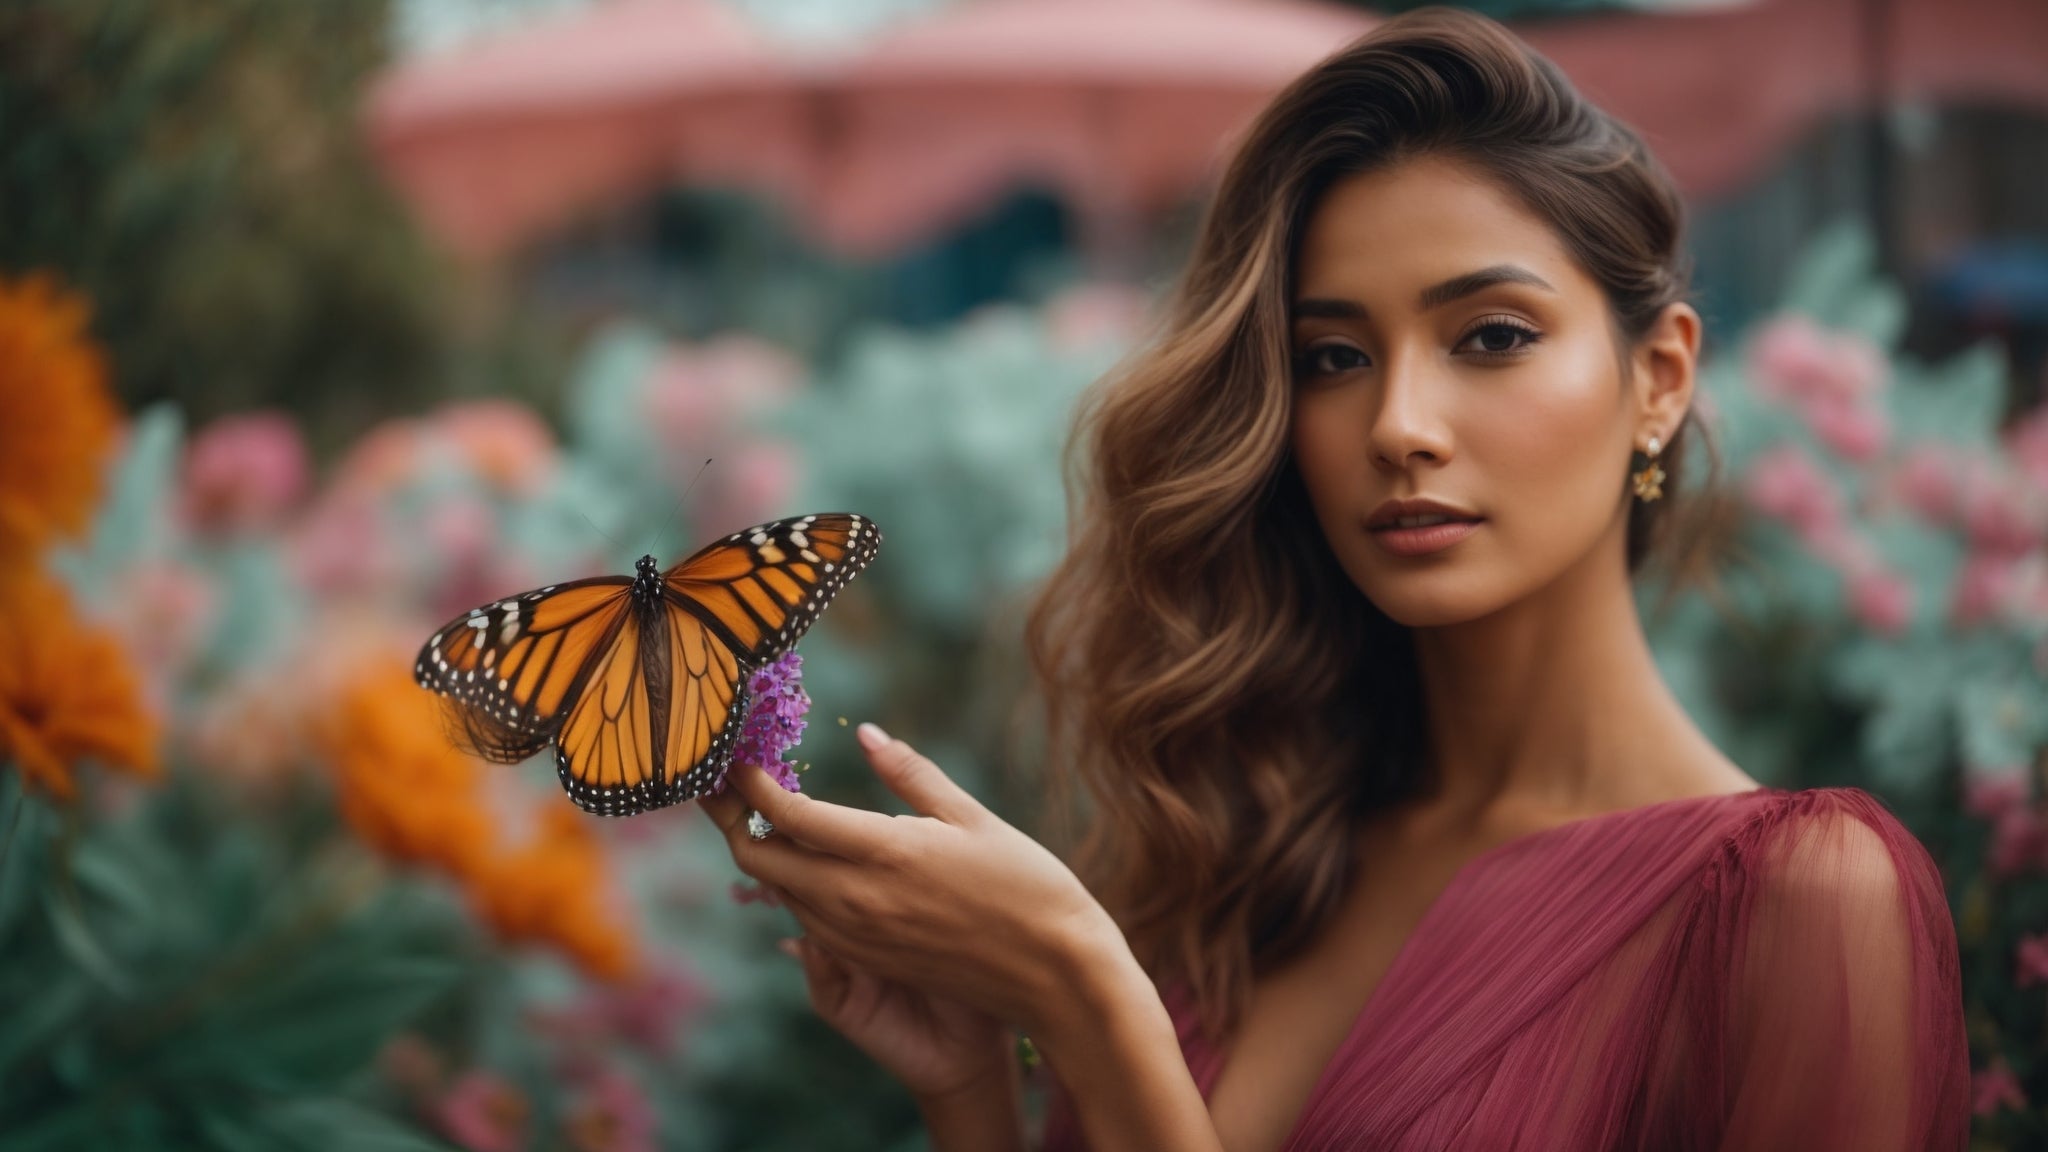 Women in pink dress holding a butterfly with roses in the background